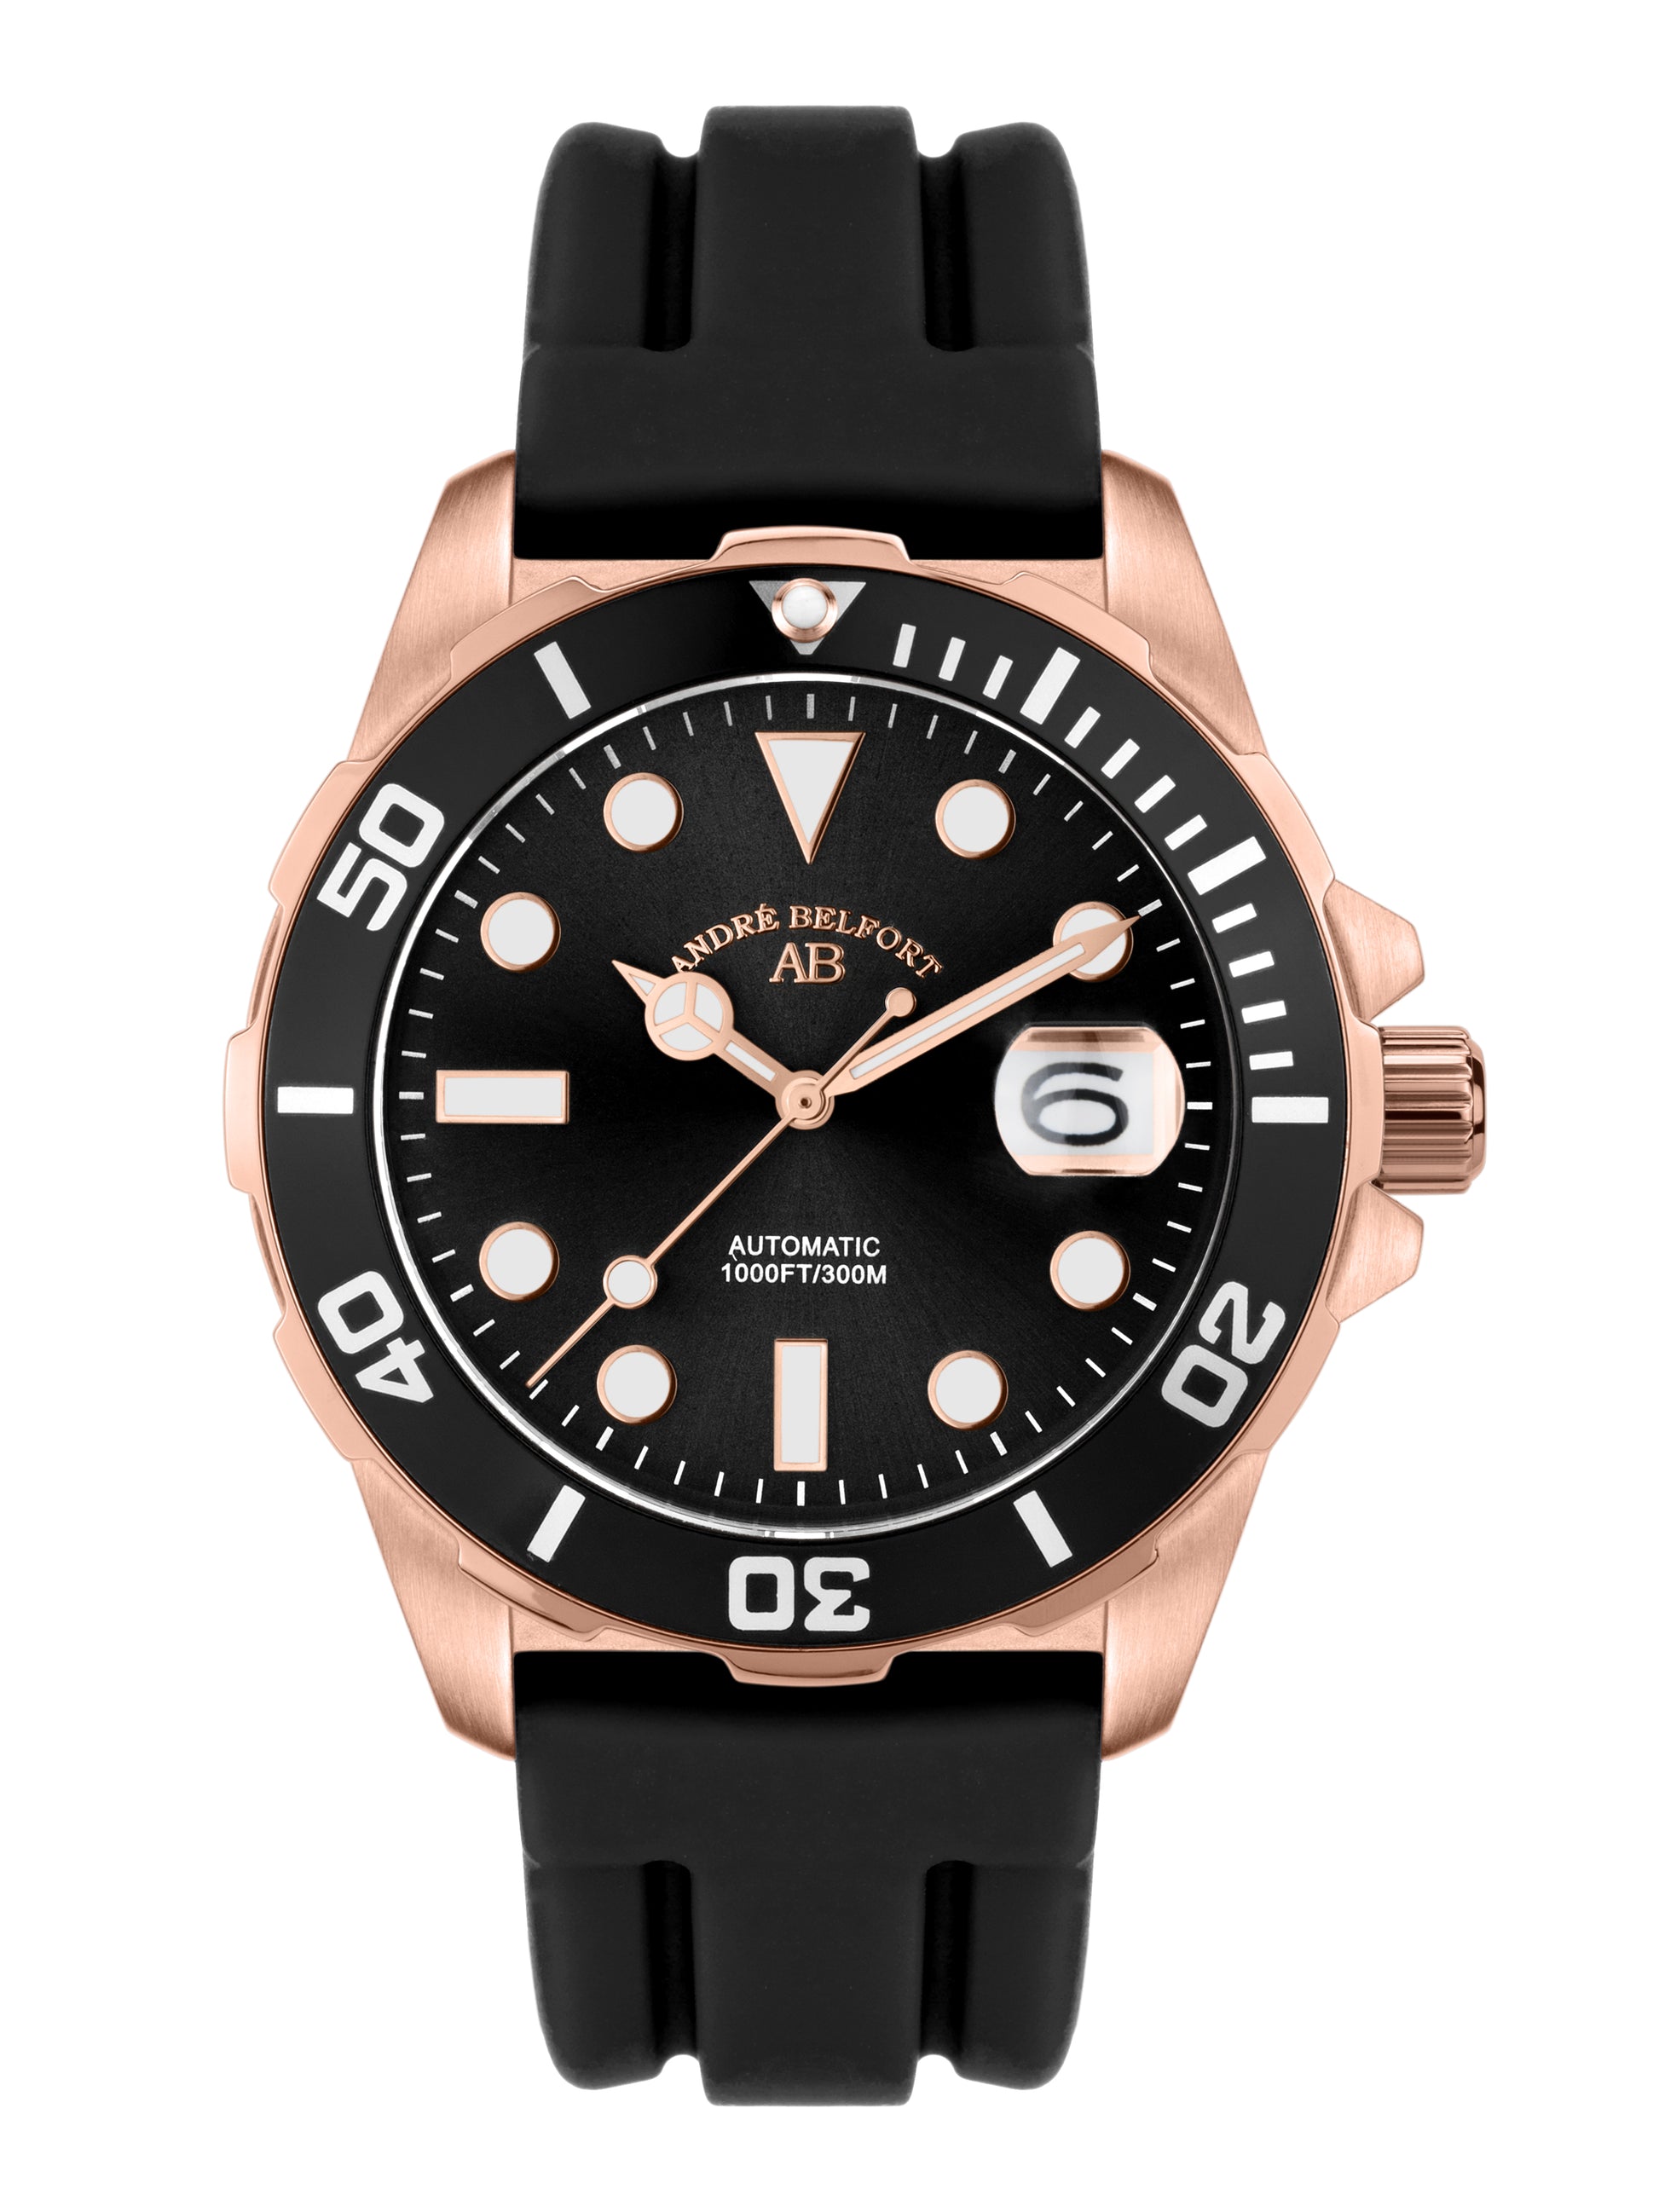 Automatic watches — Sous les mers — André Belfort — rosegold black